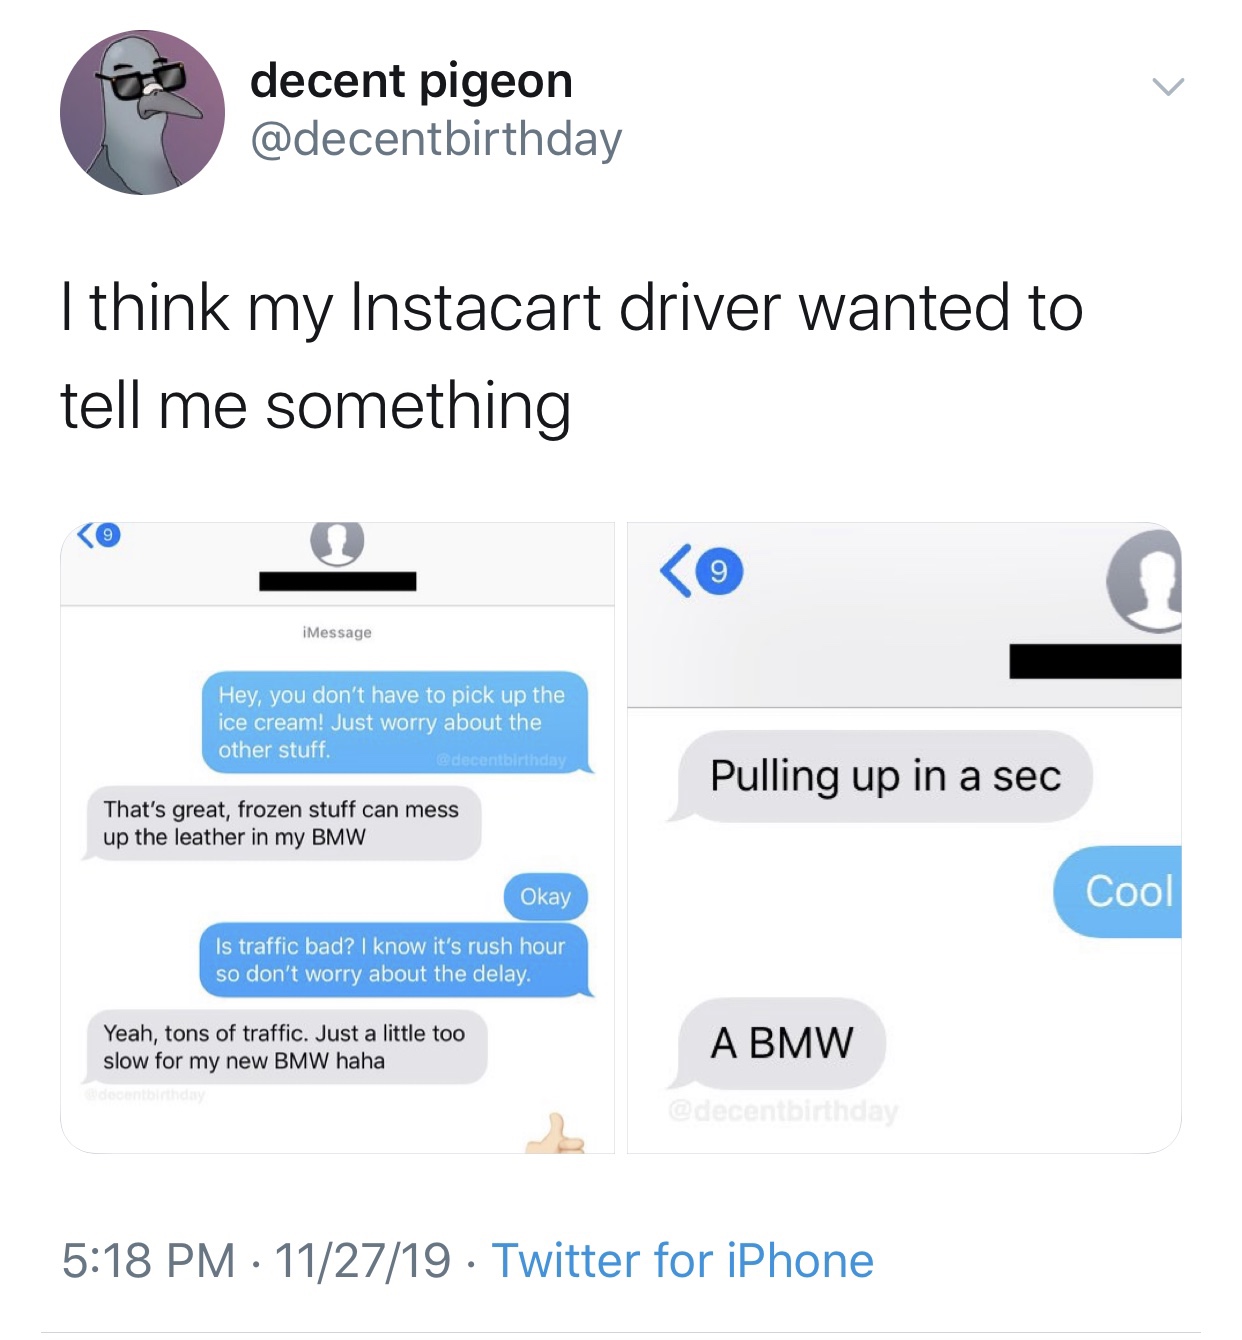 web page - decent pigeon I think my Instacart driver wanted to tell me something 0 iMessage Hey, you don't have to pick up the ice cream! Just worry about the other stuff. Pulling up in a sec That's great, frozen stuff can mess up the leather in my Bmw Ok